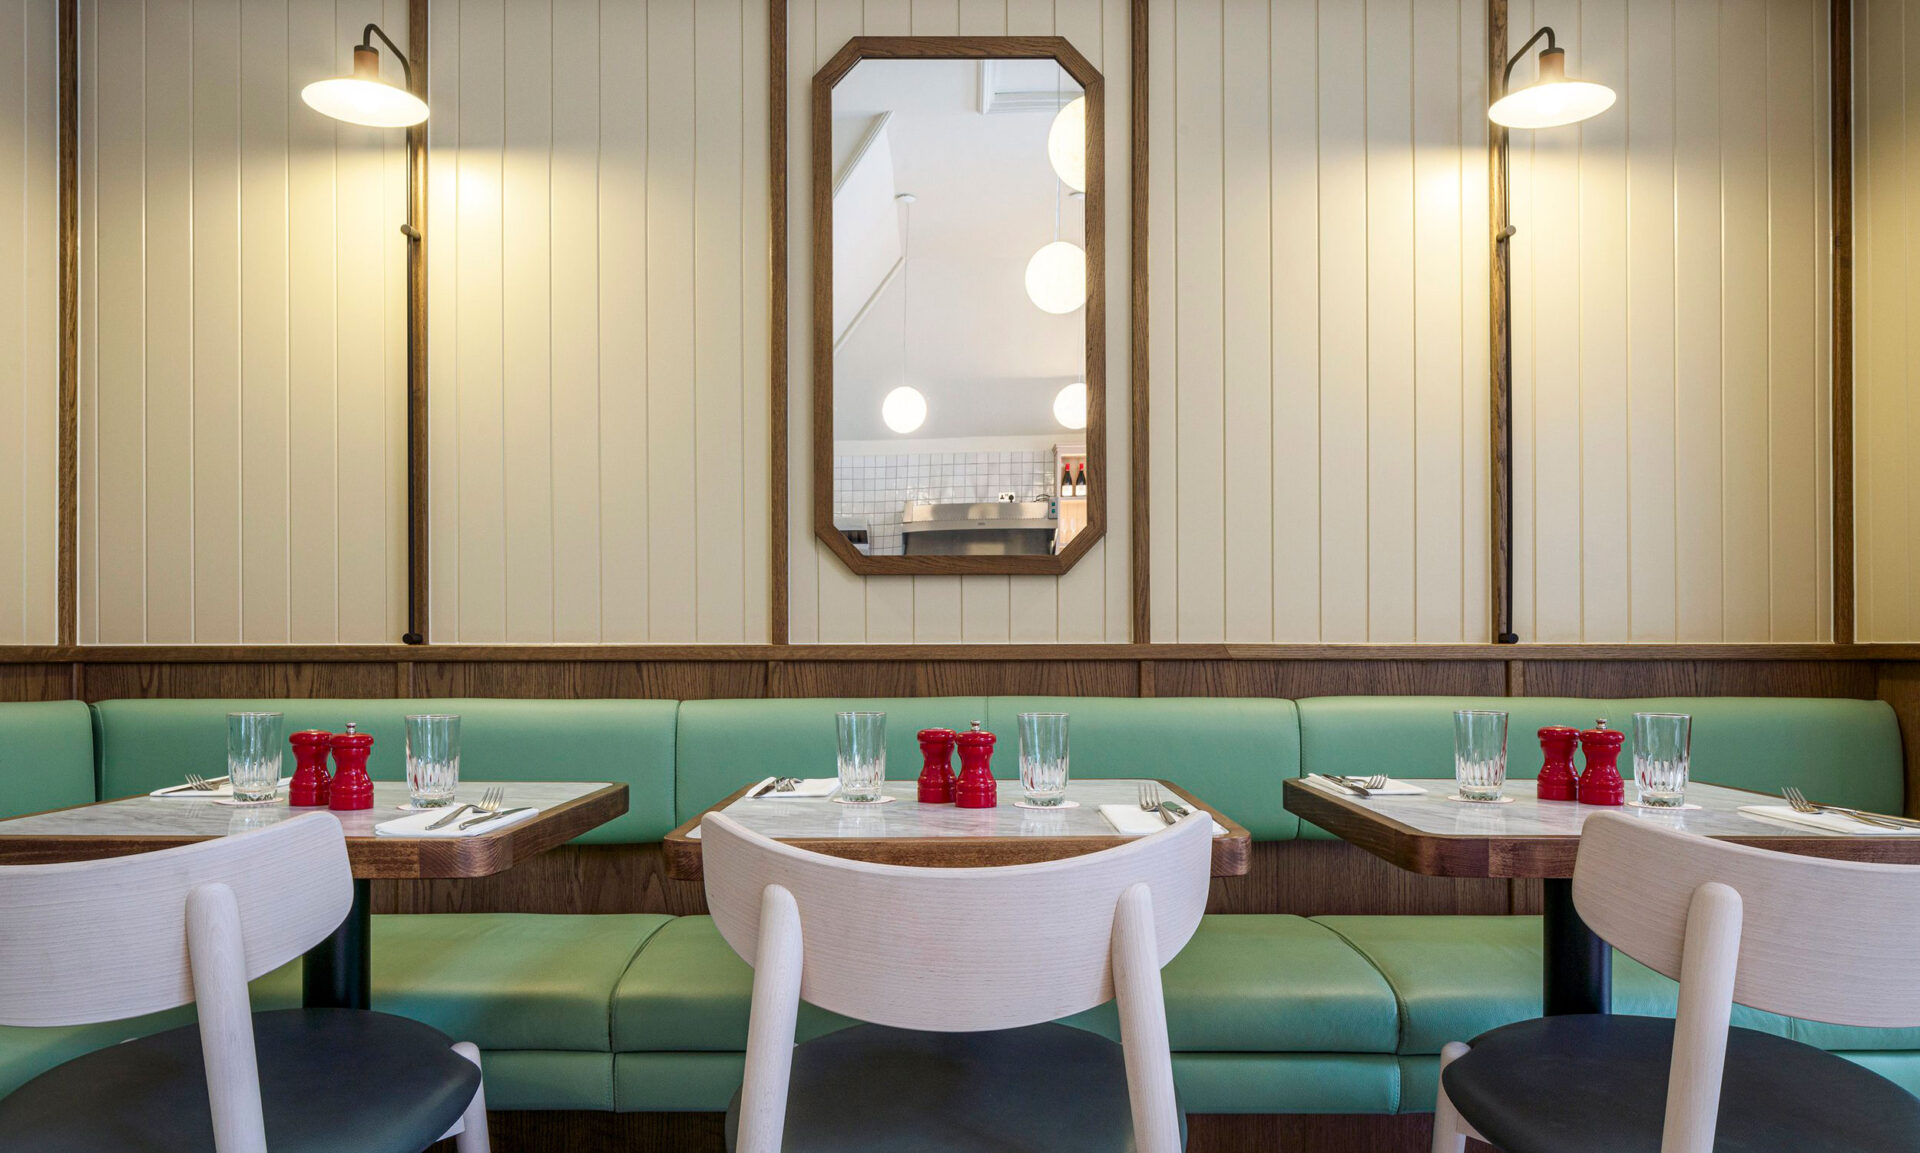 Dining seating interior featuring mint green banquette, white wooden chairs and marble wood tables, inside Audrey's Cafe & Bar Borough modern and retro restaurant designed by 3Stories Interior Design and branding creative agency London